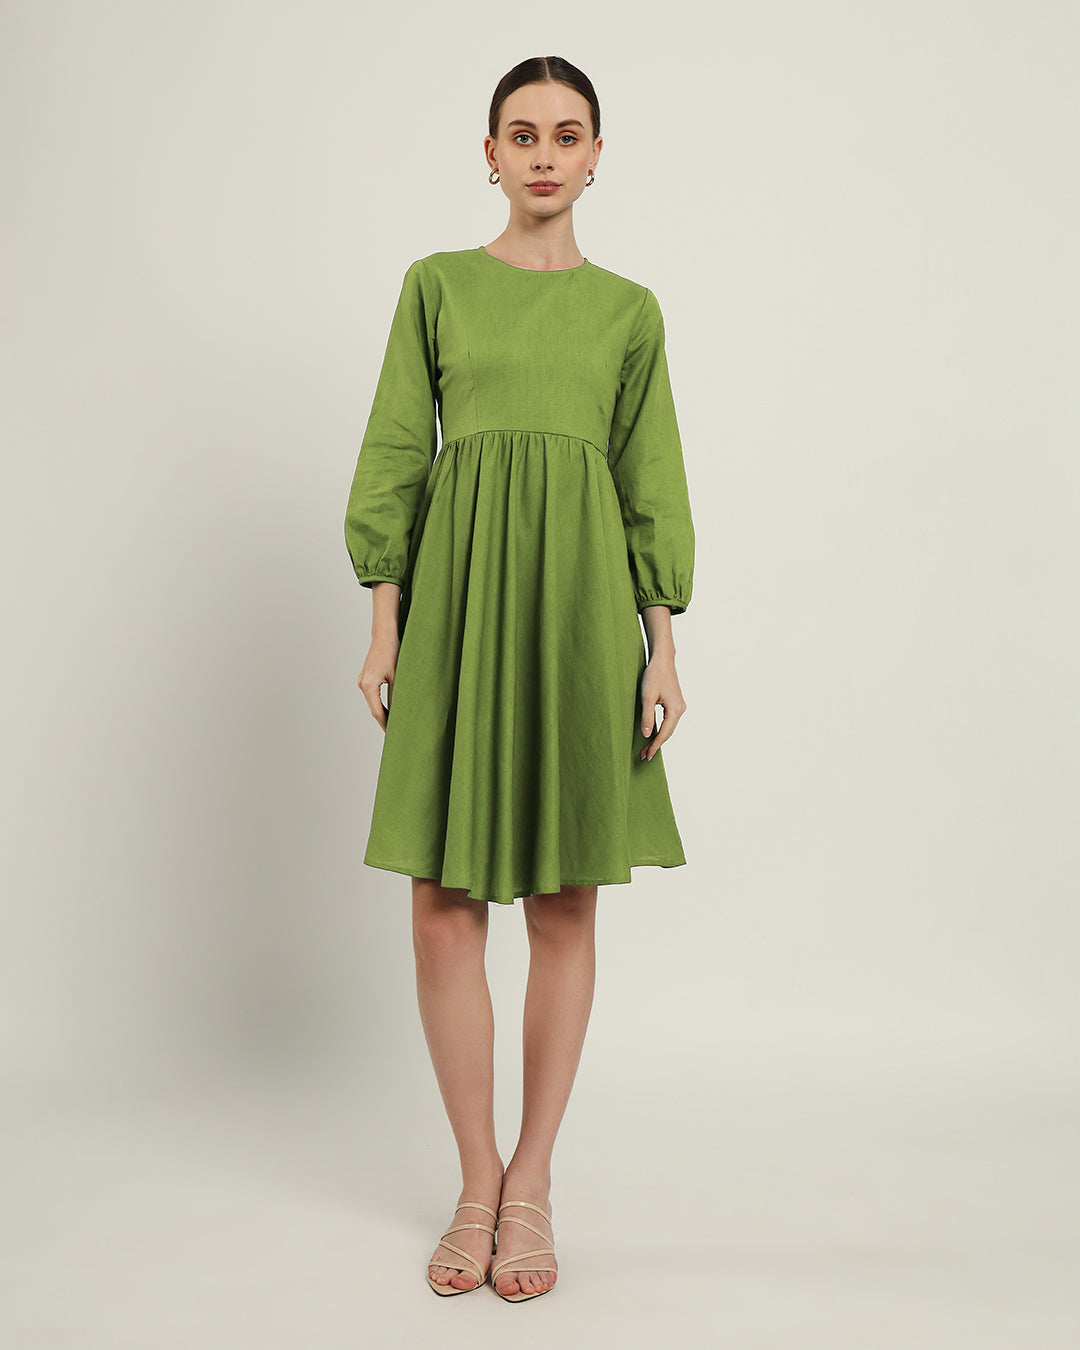 The Exeter Fern Cotton Dress